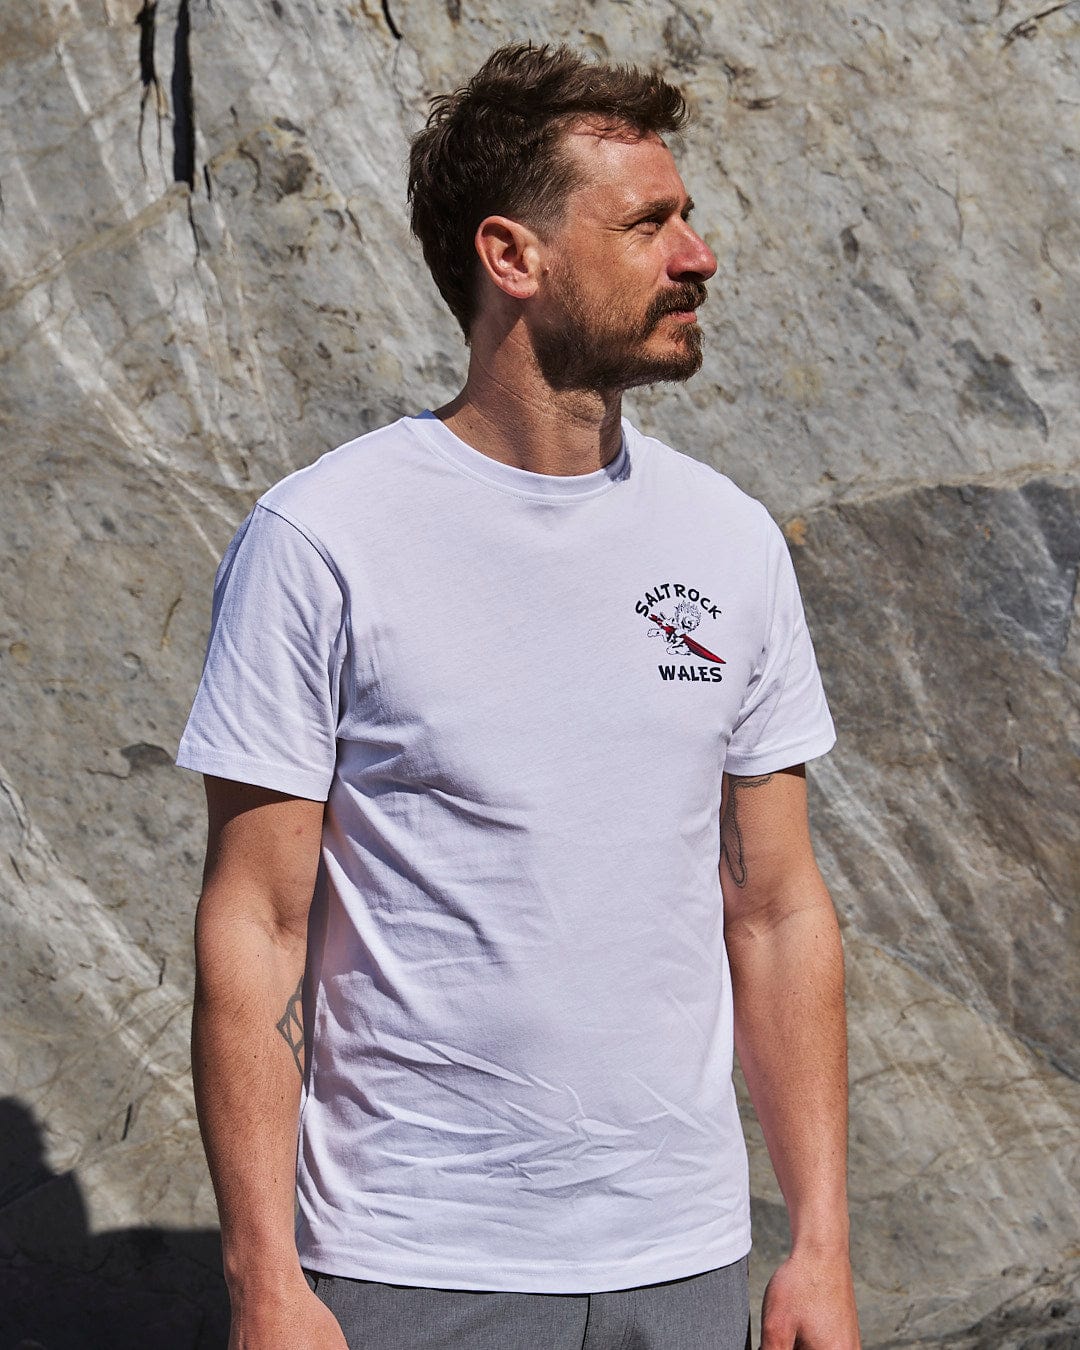 A man wearing a Wave Rider Wales - Mens Short Sleeve T-Shirt in white standing in front of a rock with Saltrock branding.